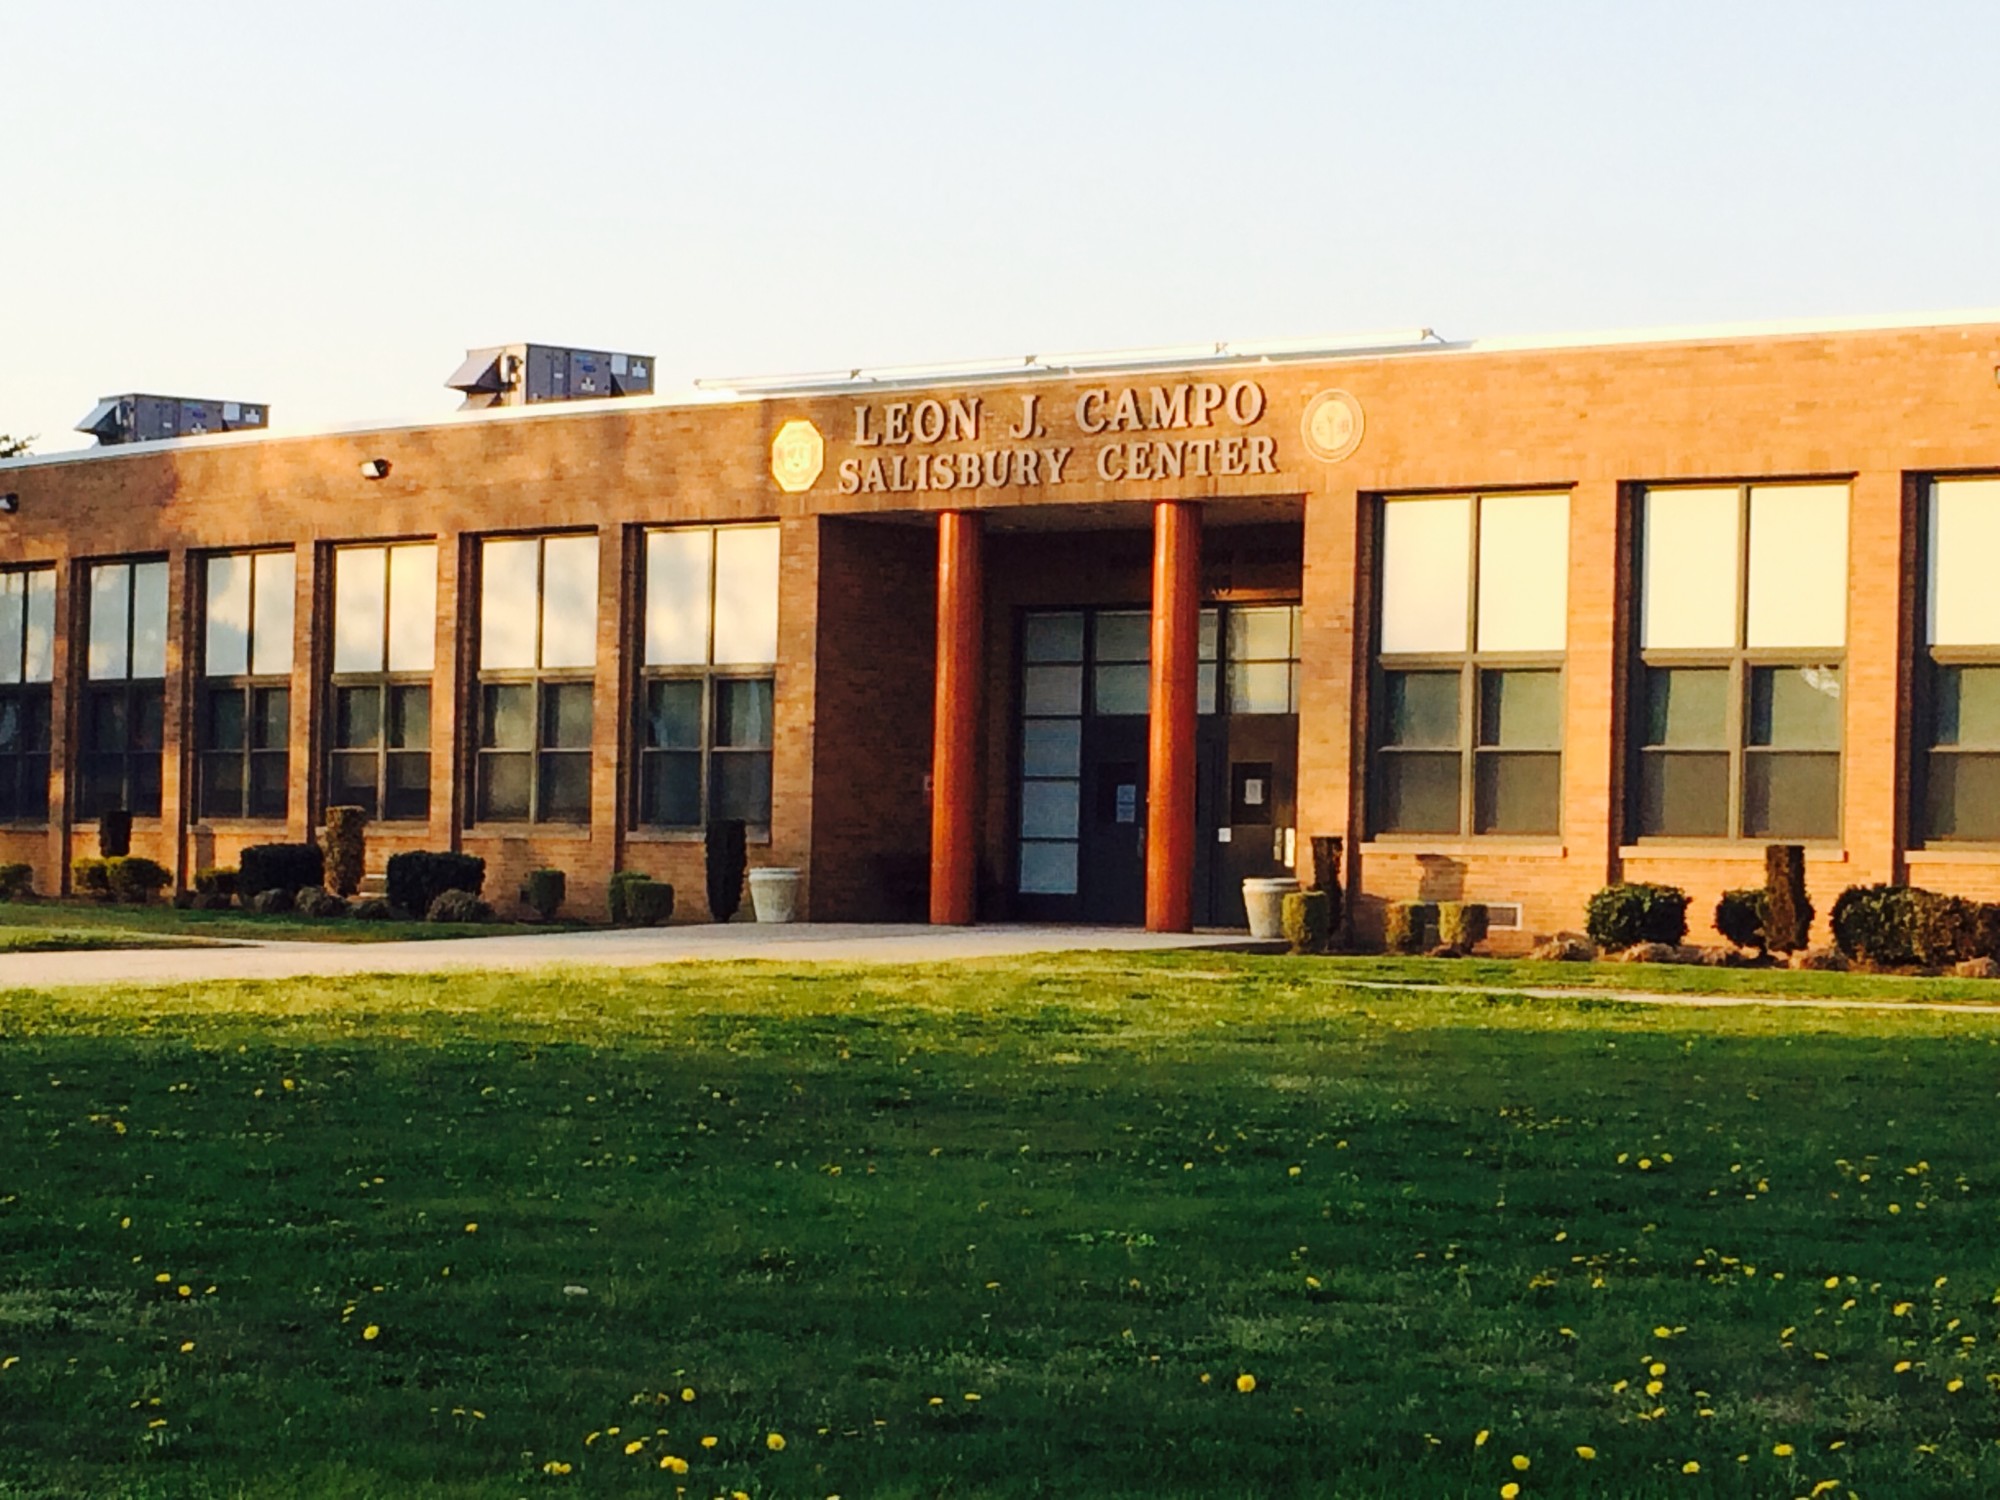 The Leon J. Campo Salisbury Center serves as the administrative offices for the East Meadow School District and hosts Board of Education meetings.